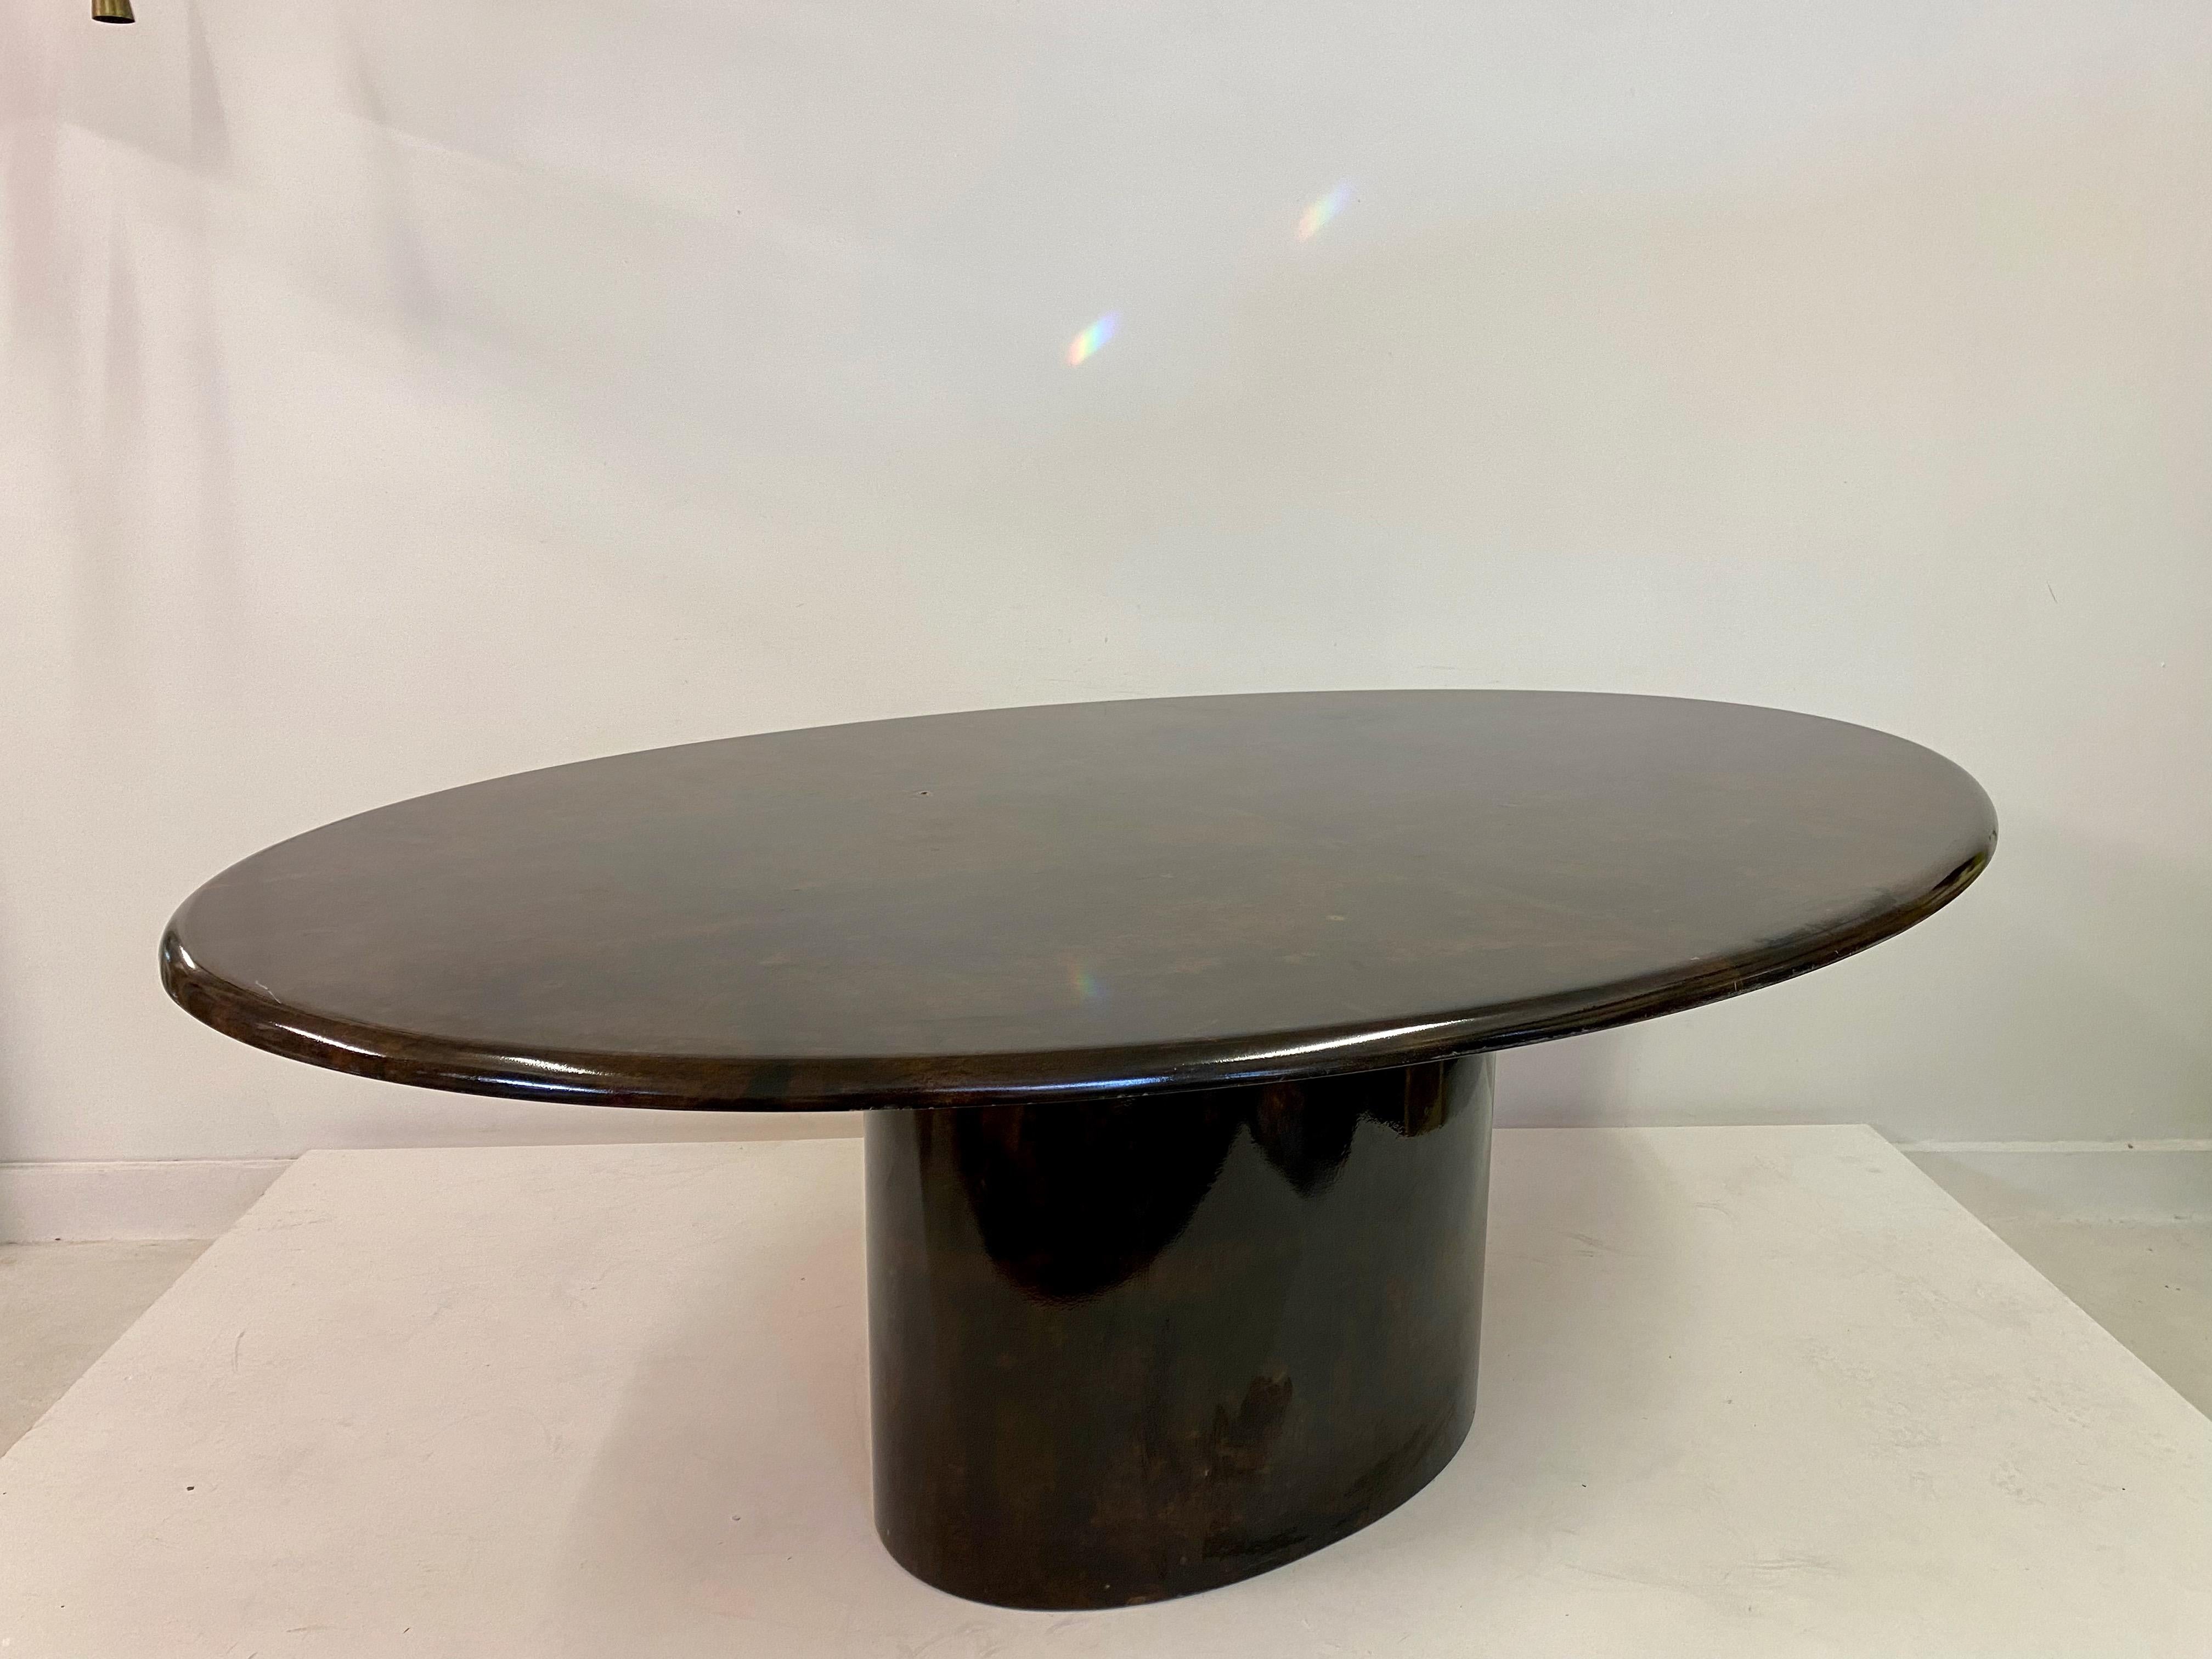 20th Century Brown Lacquered Goatskin Oval Dining Table by Aldo Tura